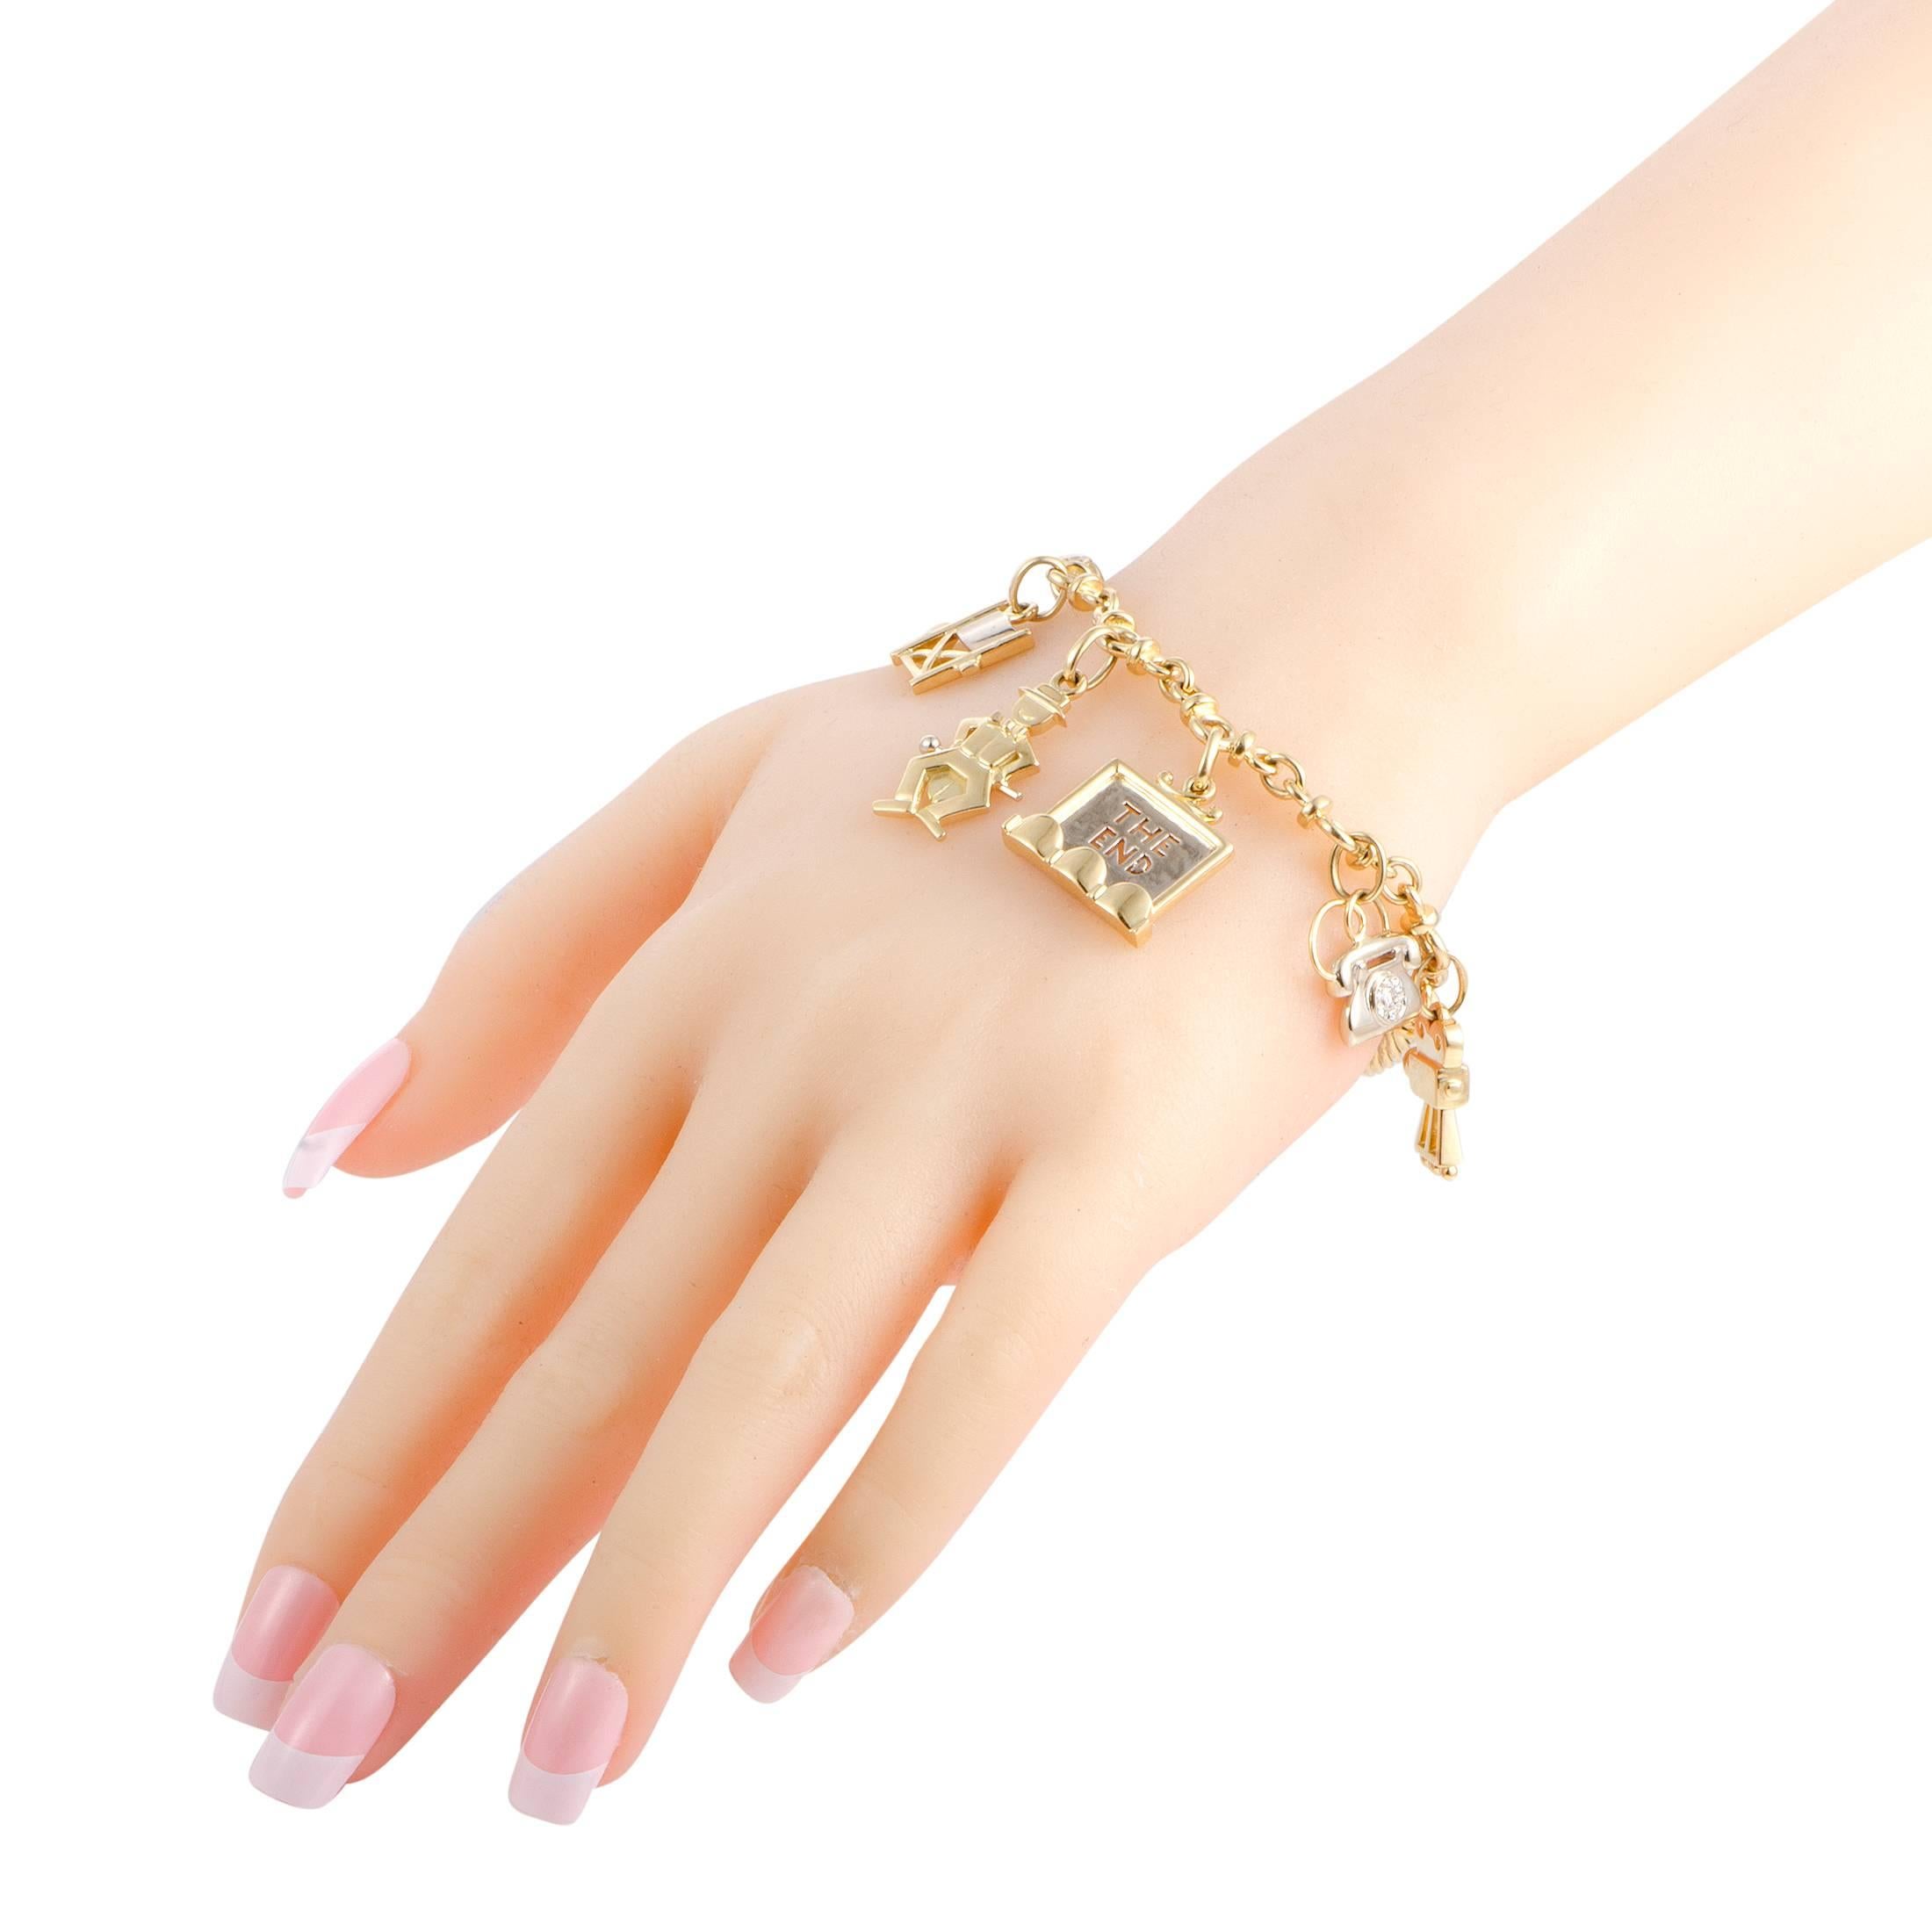 Designed in the brand’s distinctive style with spotless precious materials, adorable charms and slightly offbeat motifs, this remarkable bracelet from Pomellato is made of gleaming 18K yellow gold with dashes of splendid 18K white gold and lustrous